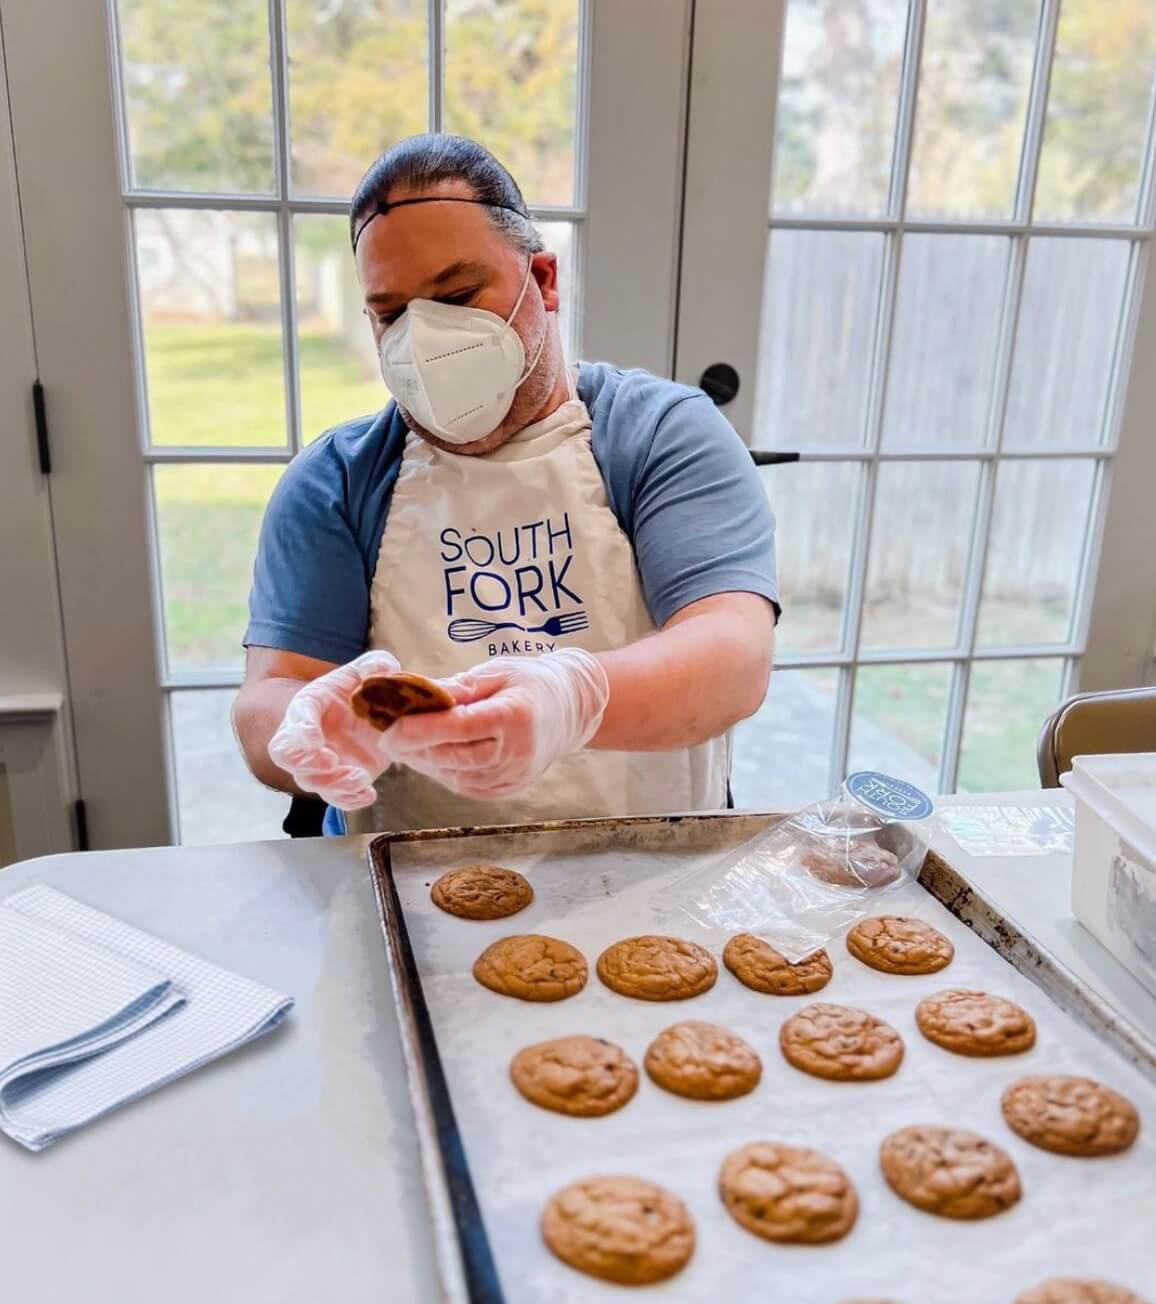 Employees at South Fork Bakery get "real-world' experience, on-the-job training, and priceless opportunities to socialize